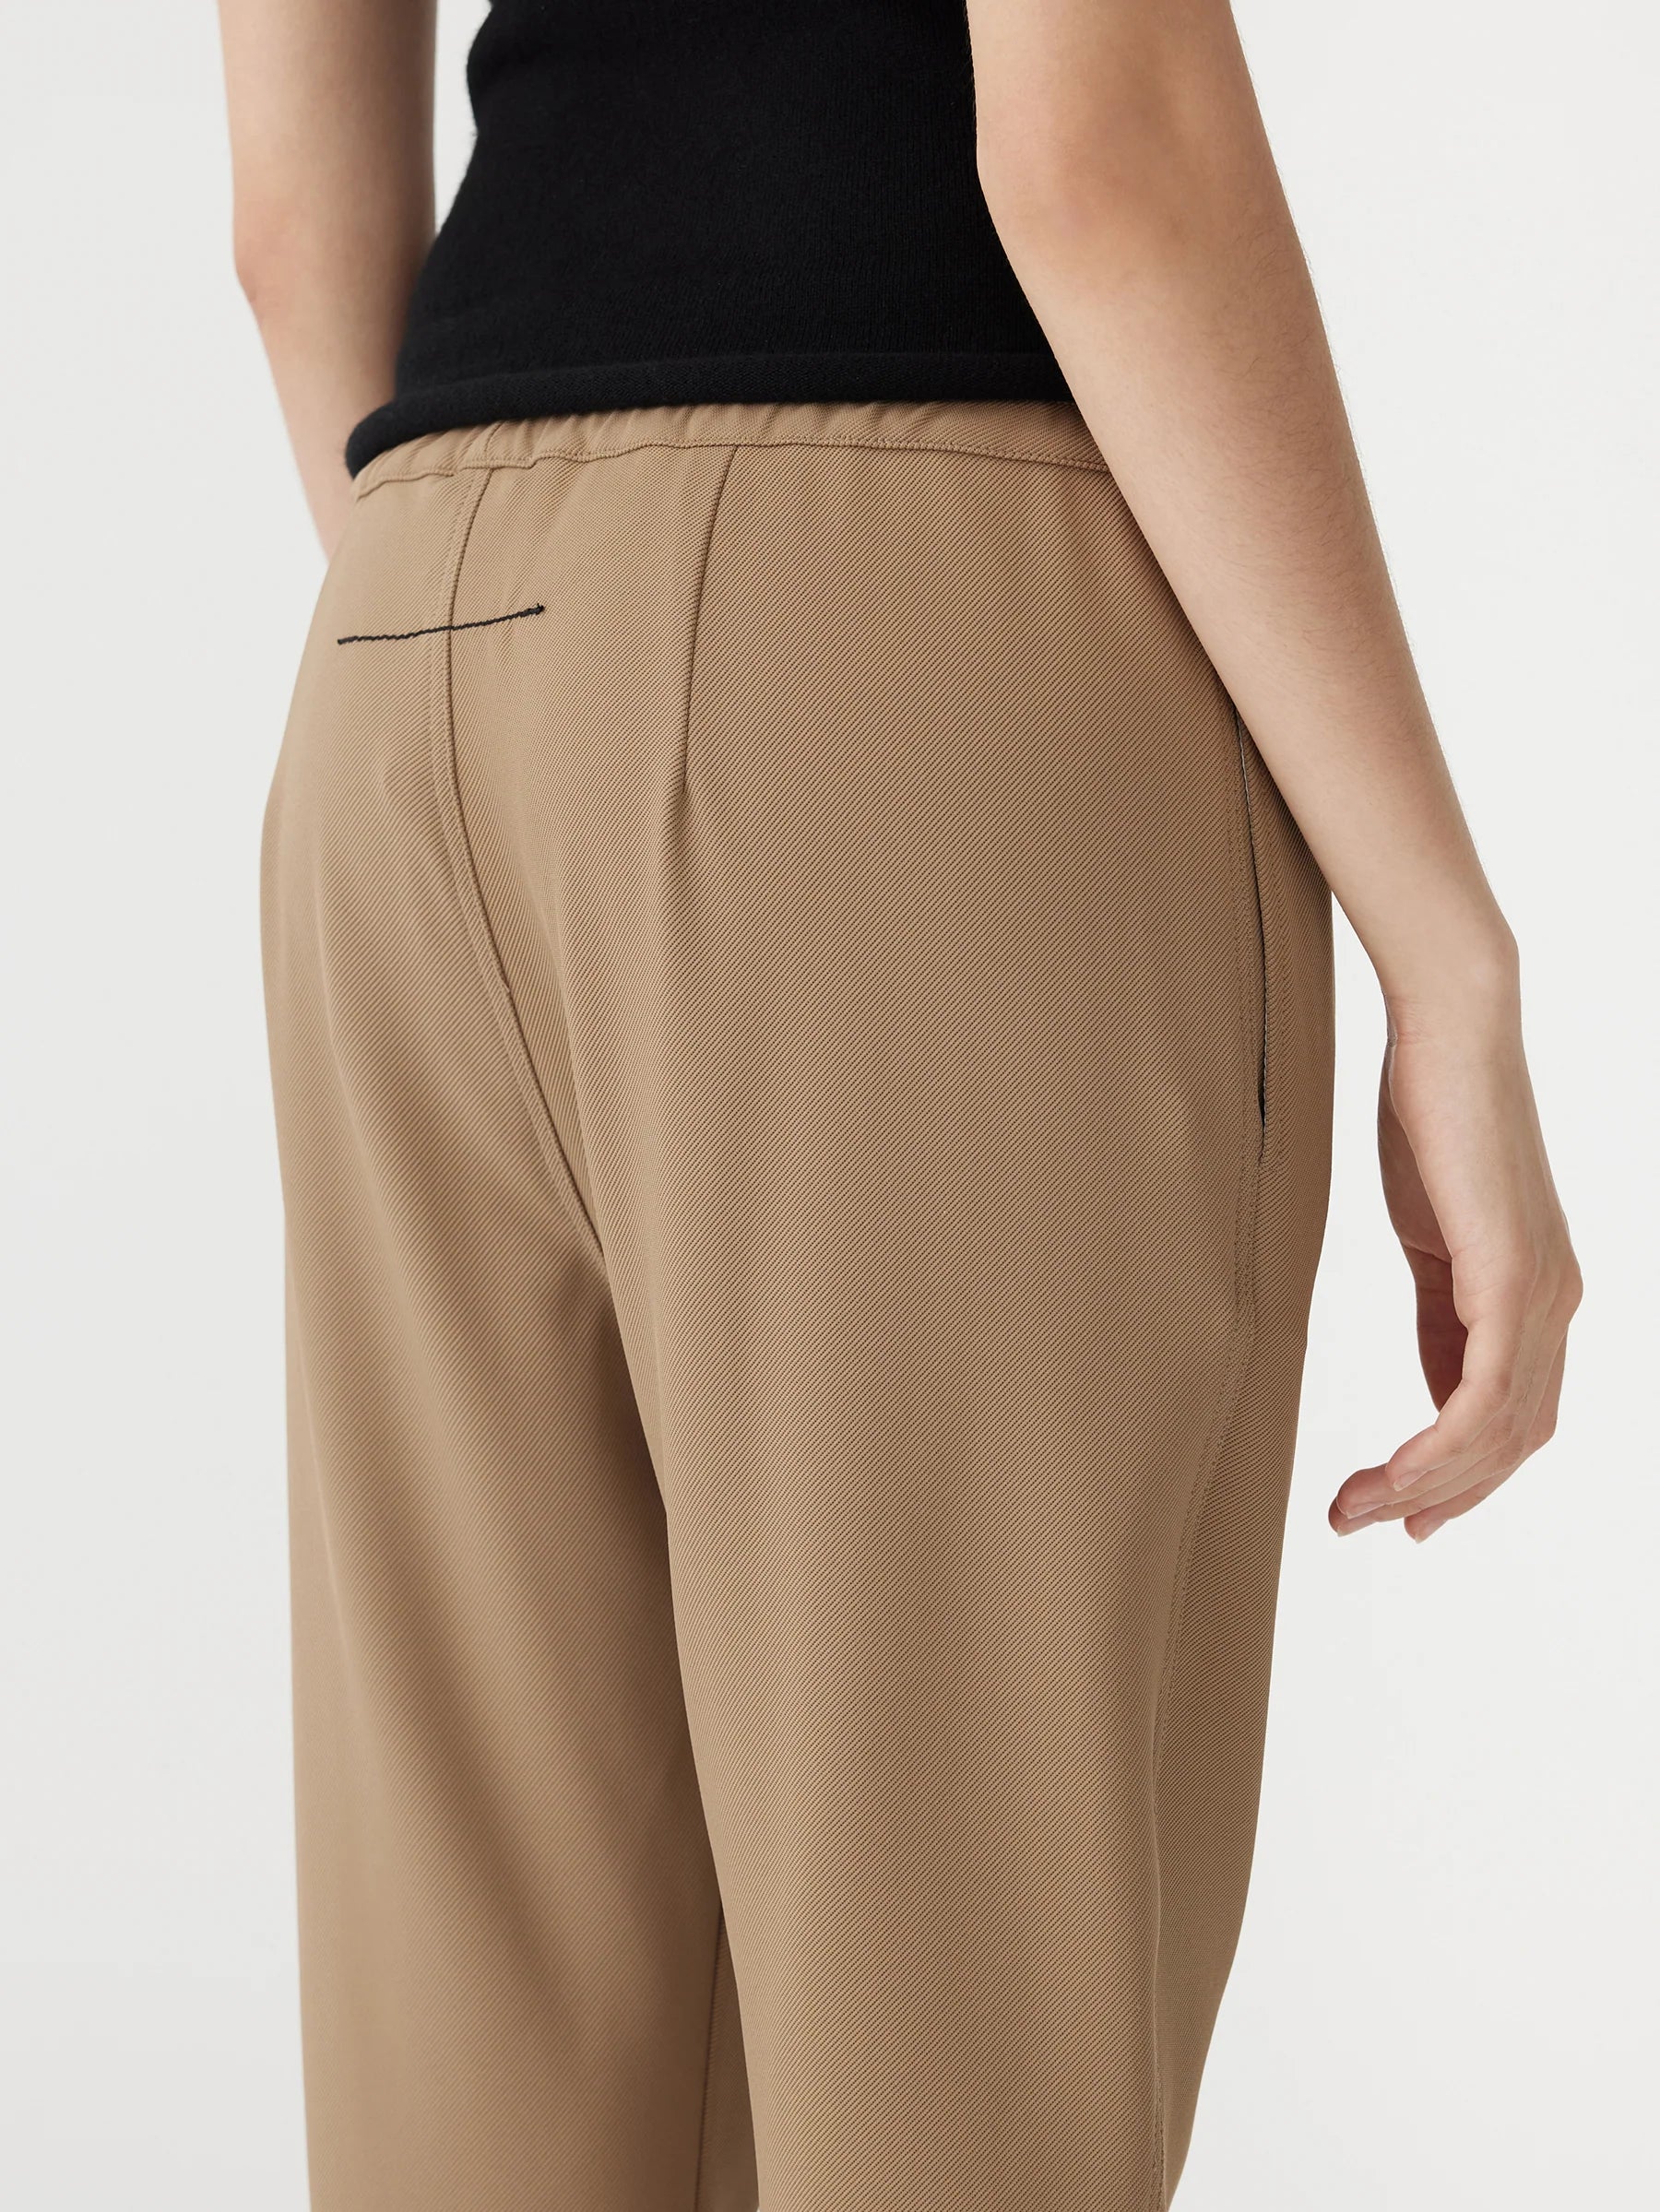 stretch Twill Tapered Pant in Tan